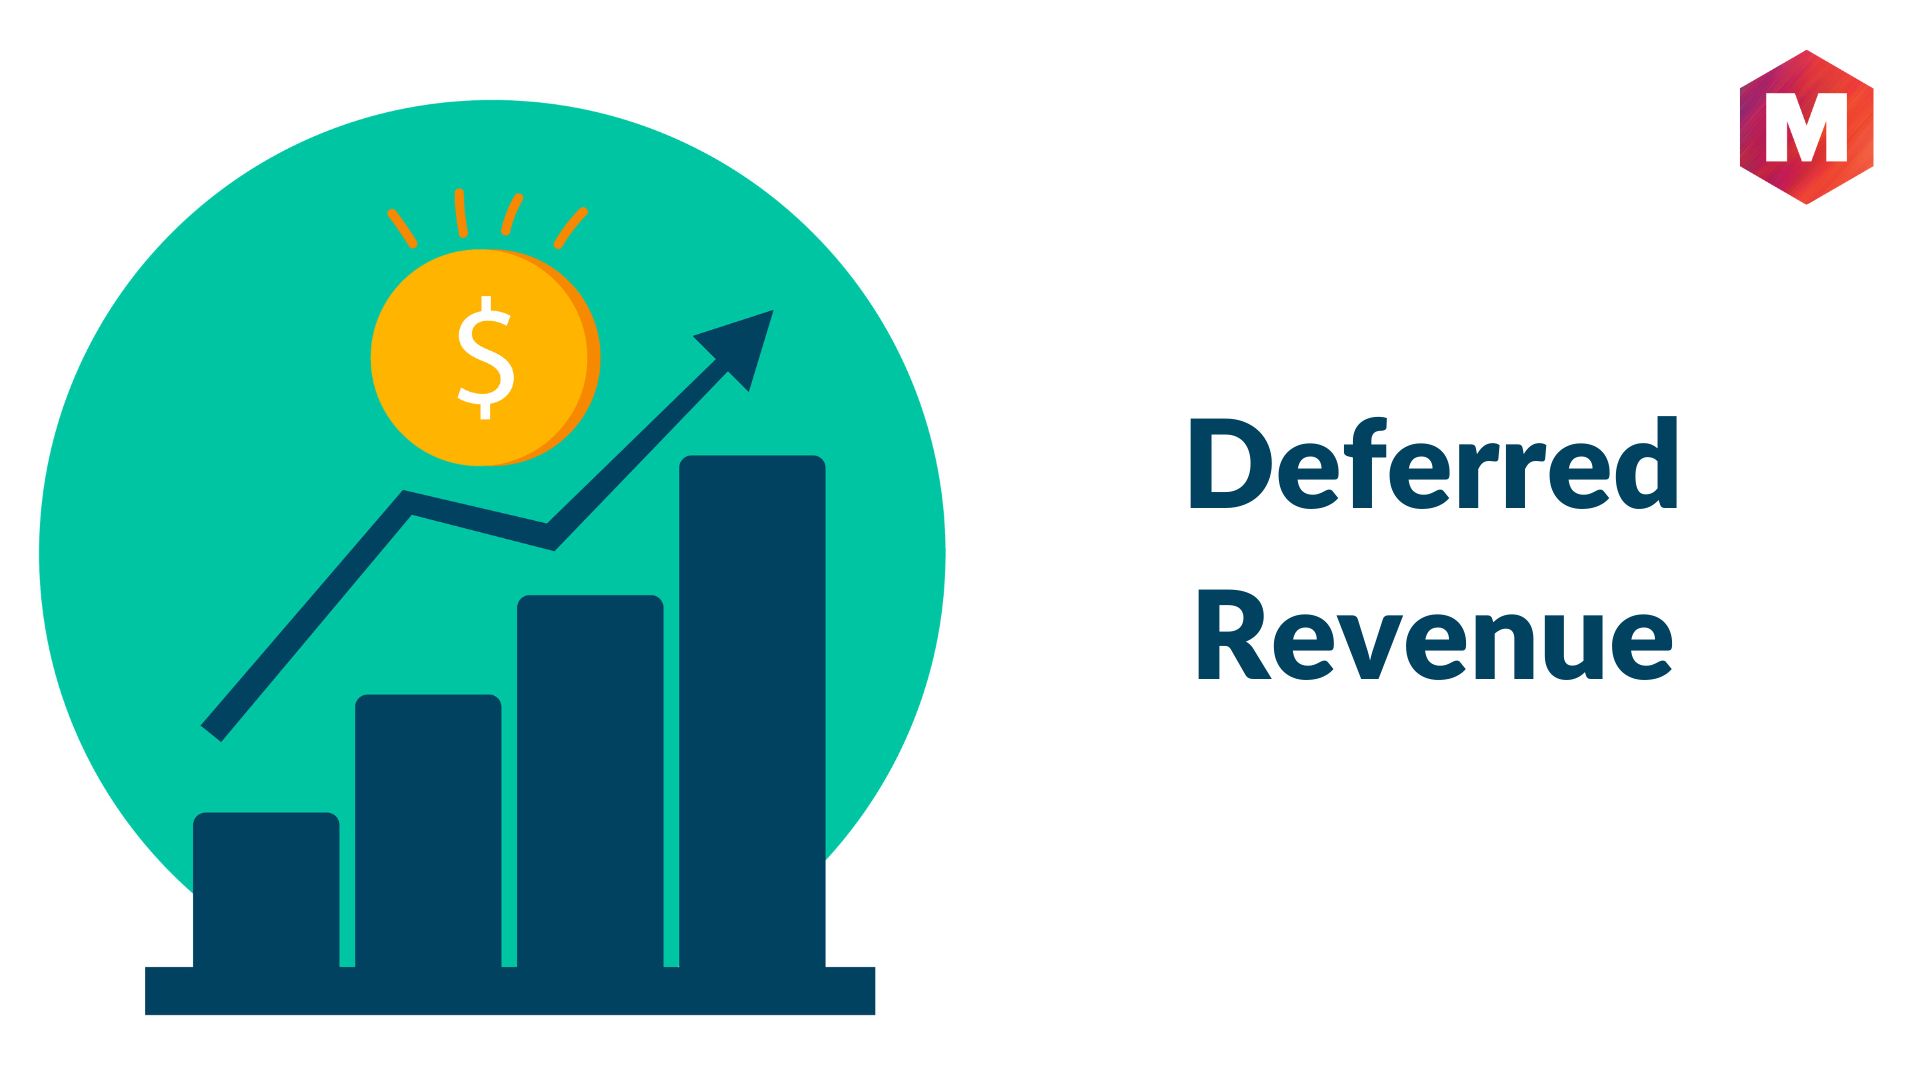 Deferred Revenue - Definition, Importance And Examples